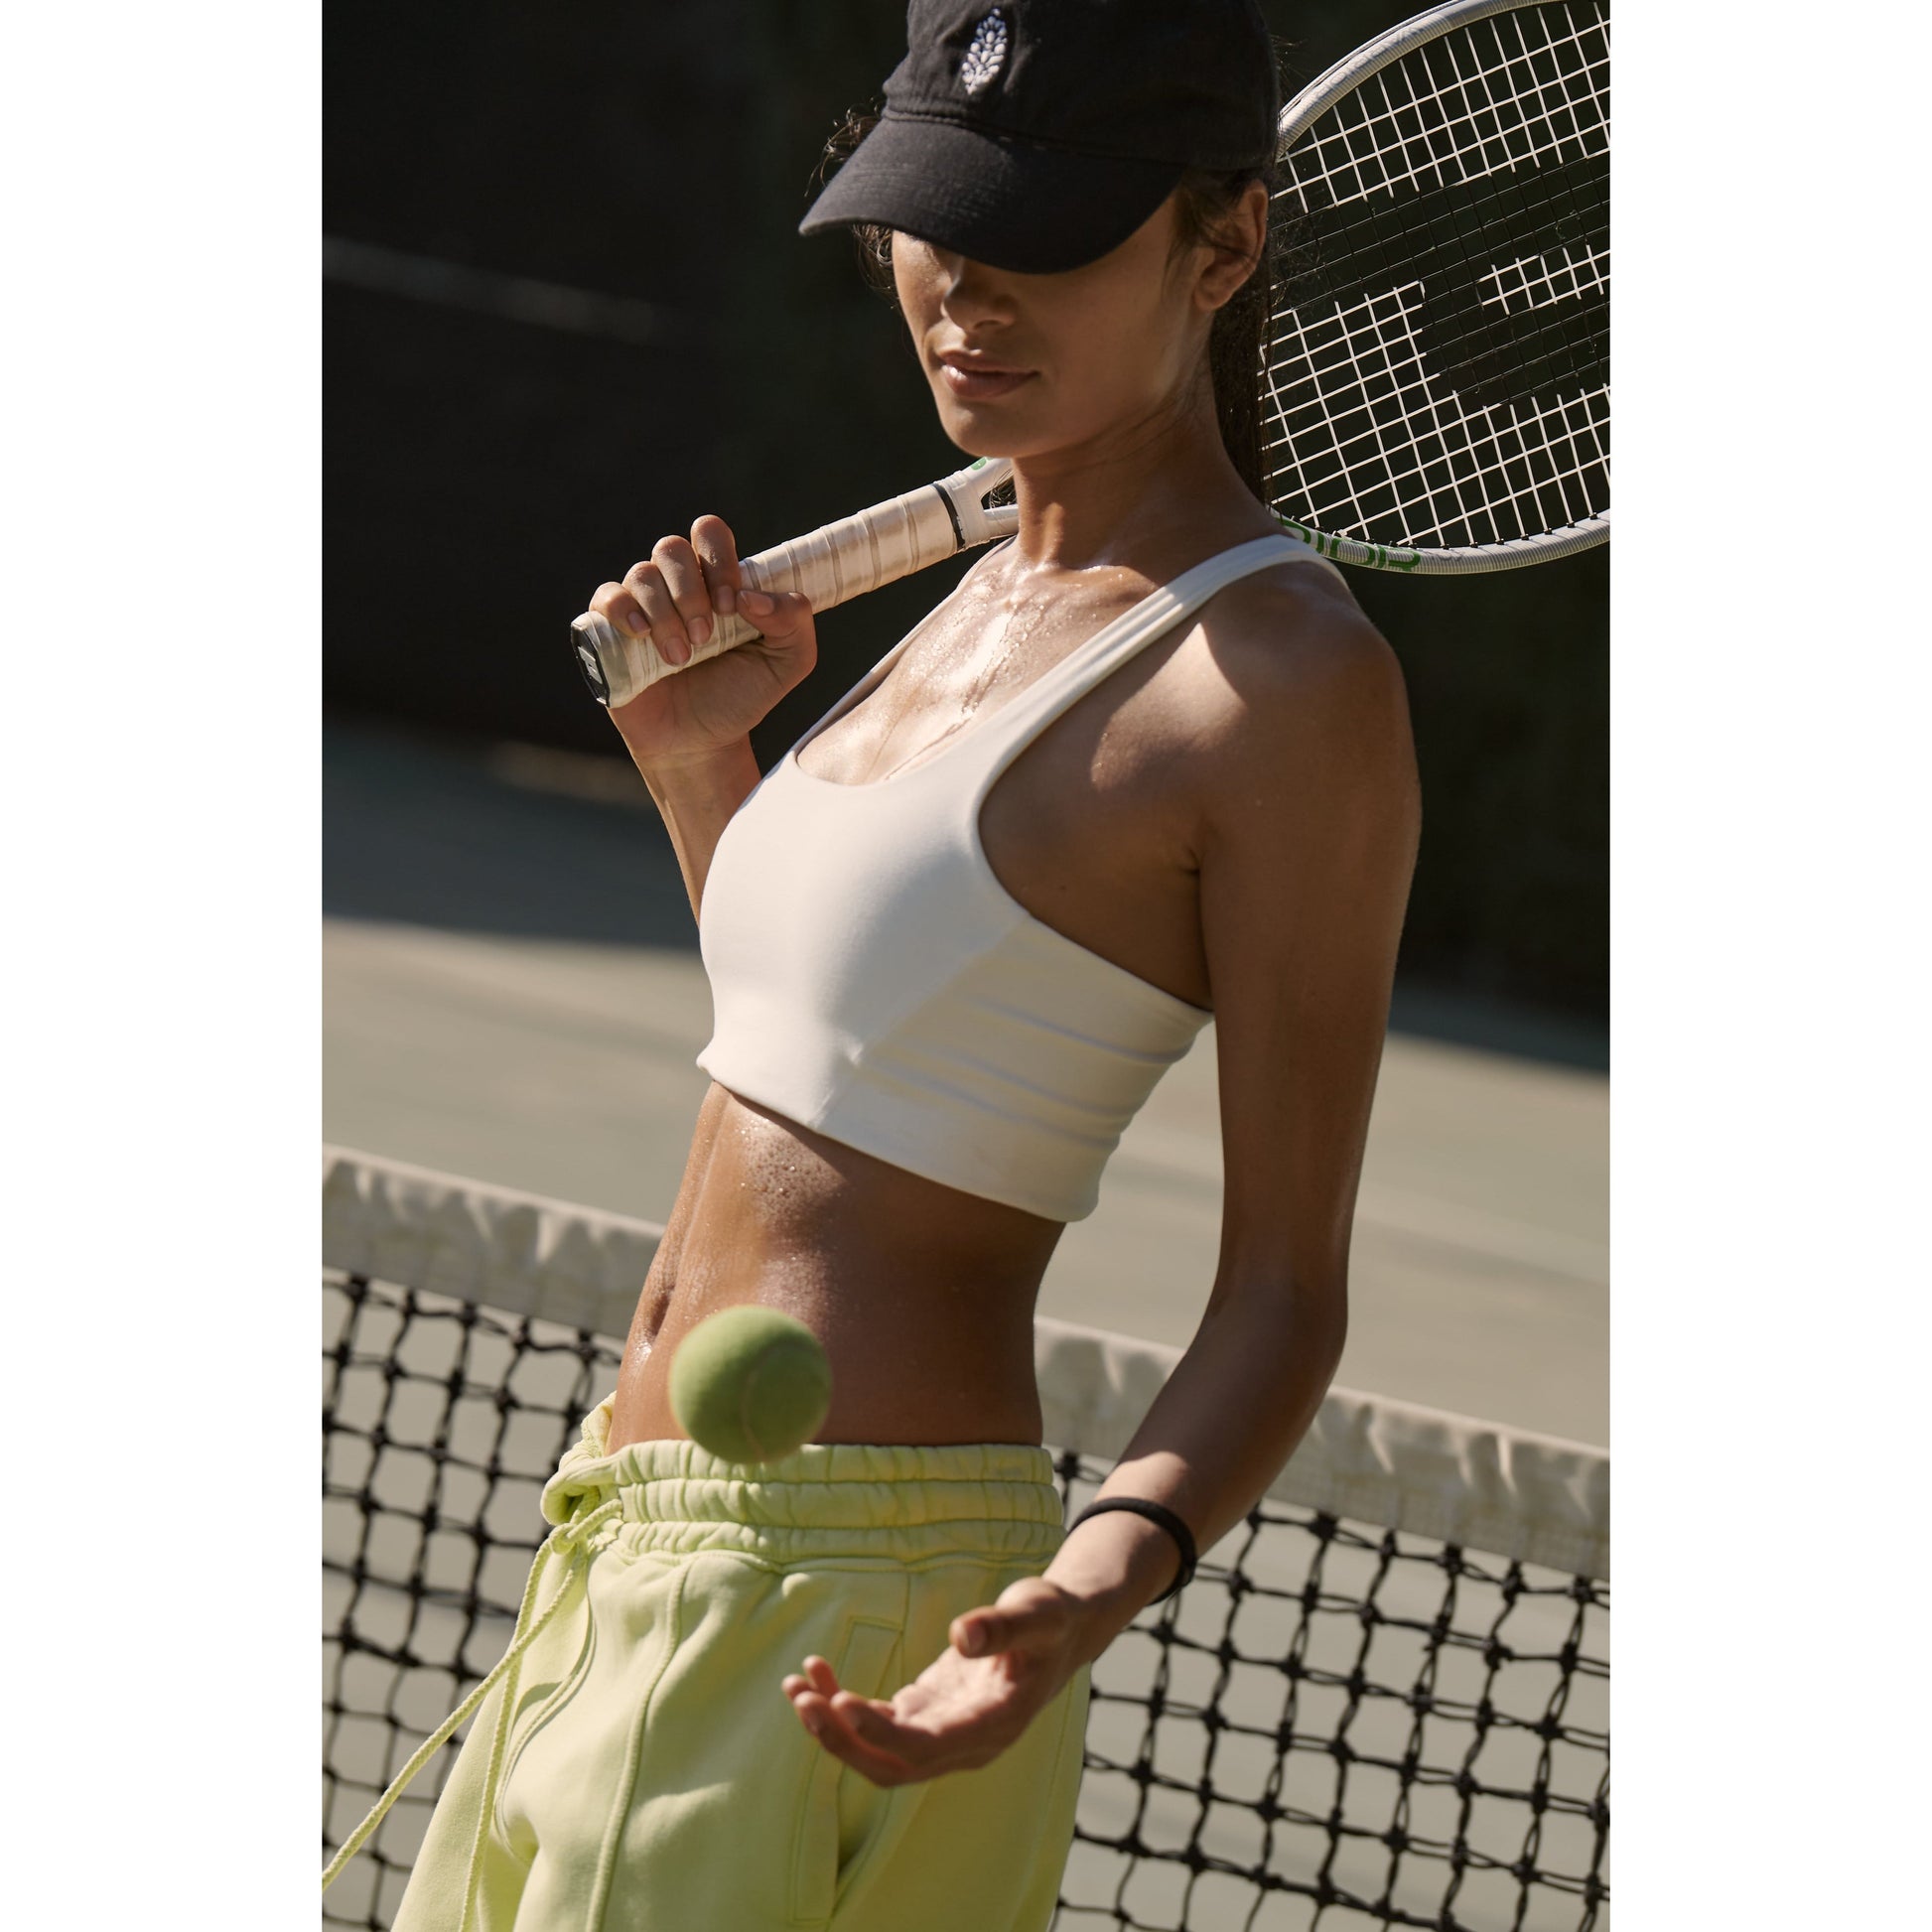 Woman in Free People Movement sportswear with a breathable design balancing a tennis ball on a racket on a sunny court.